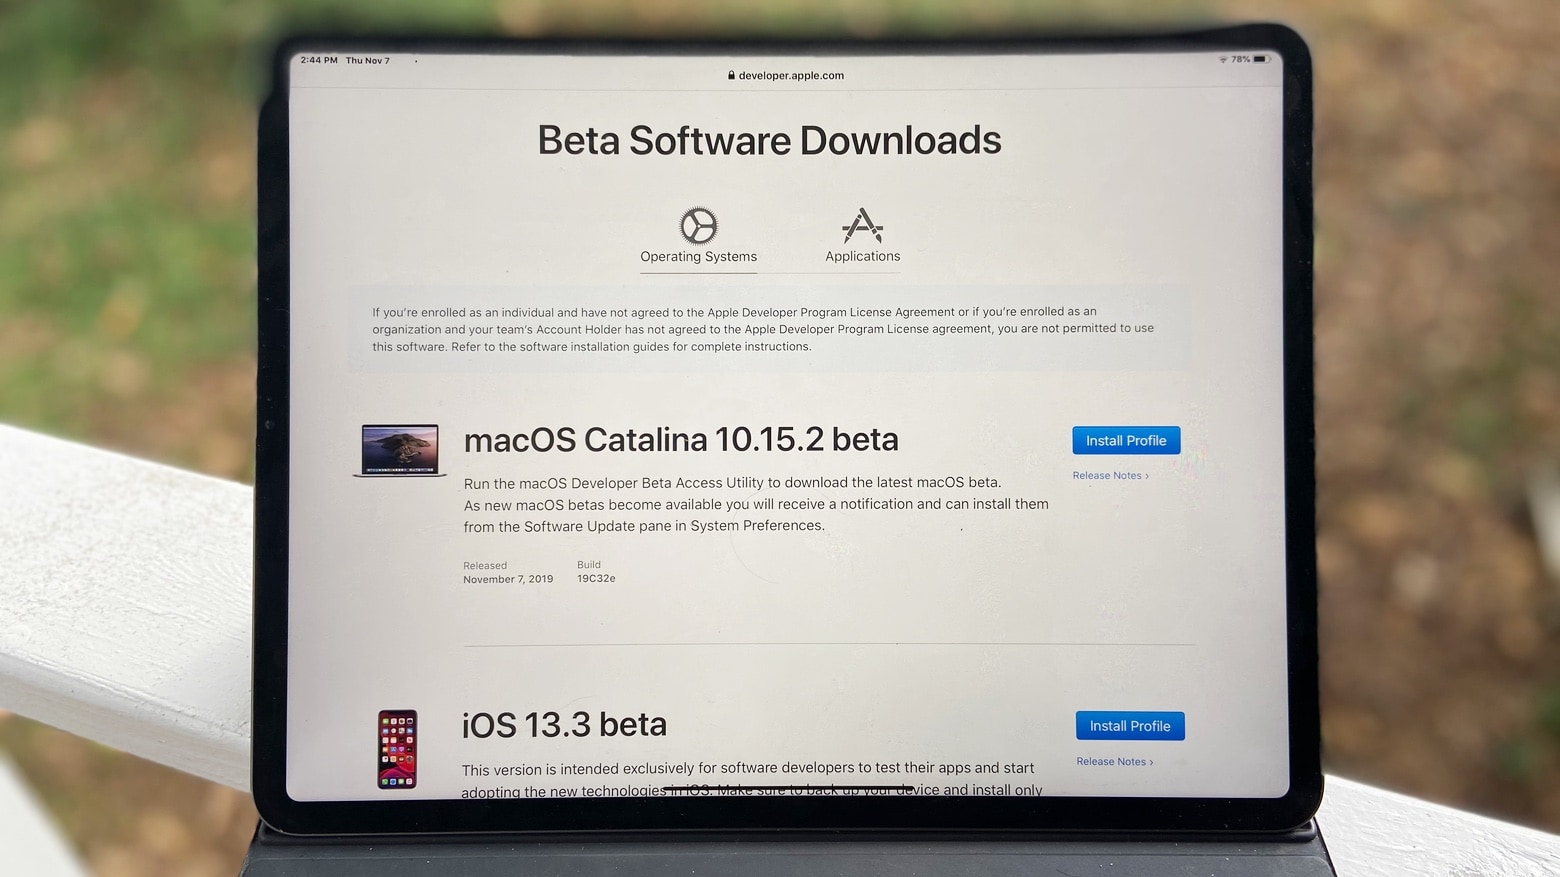 macOS Catalina 10.15.2 beta available for developers